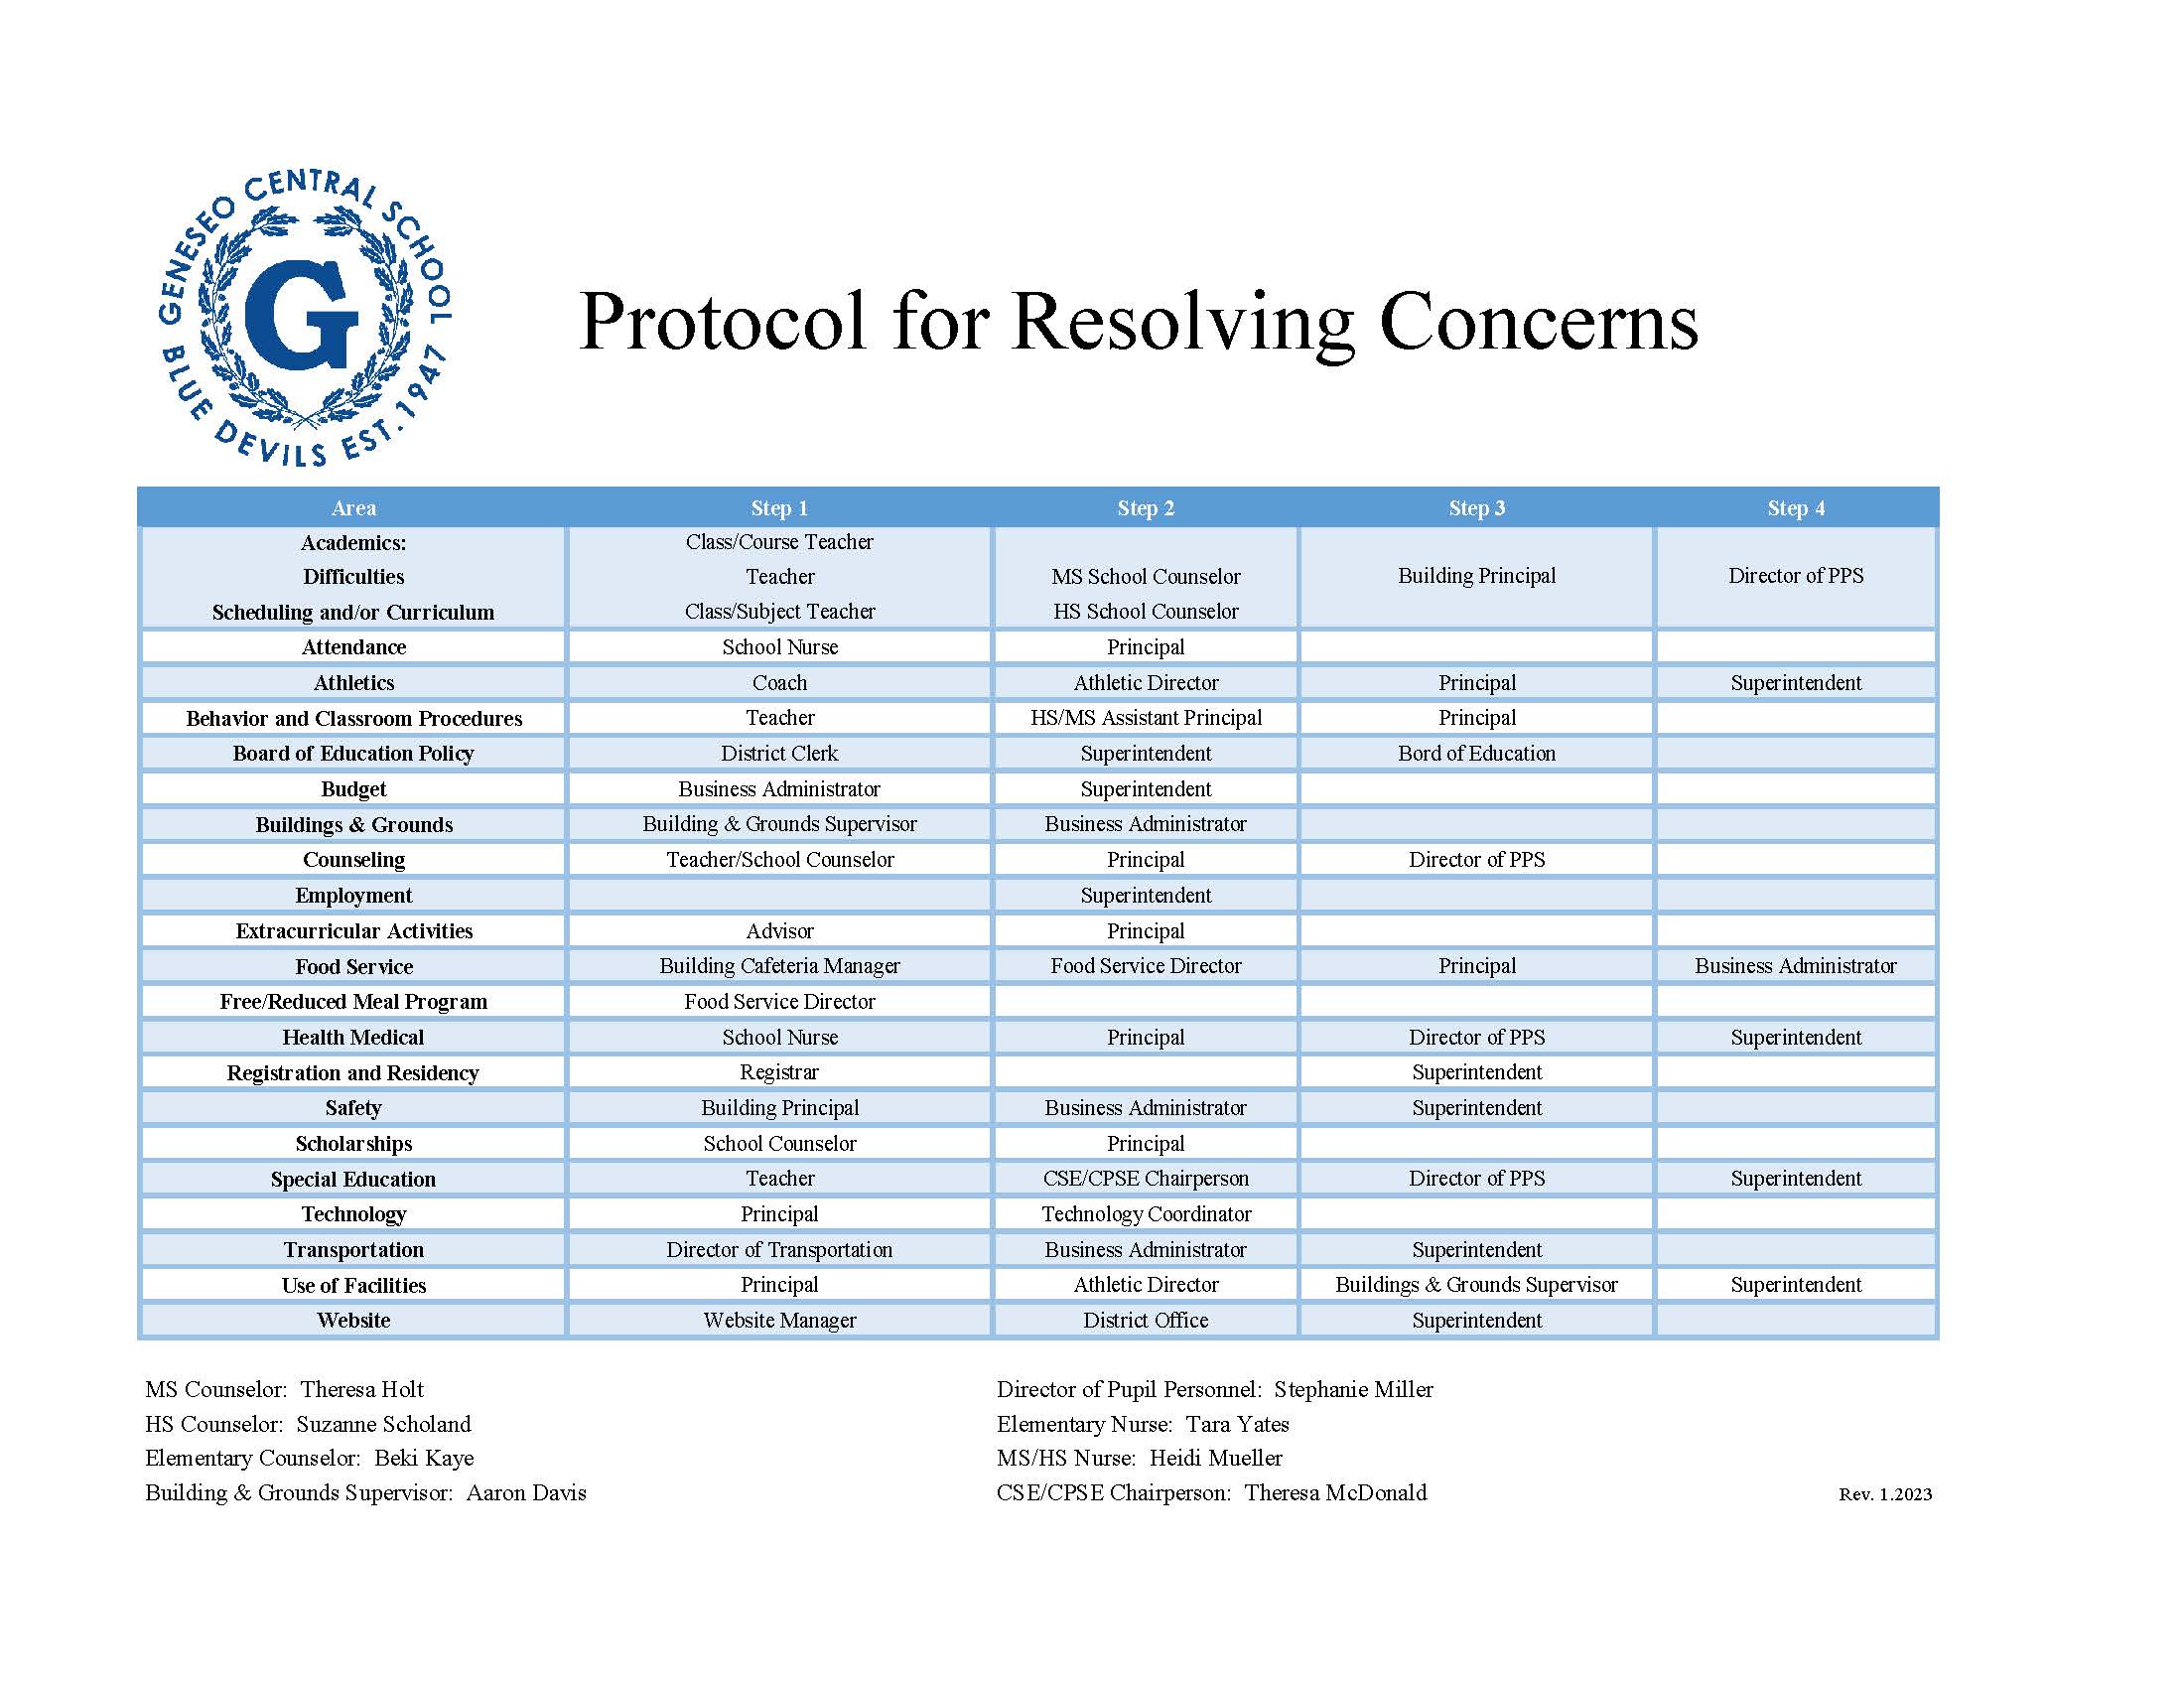 Protocol for Resolving Conflict